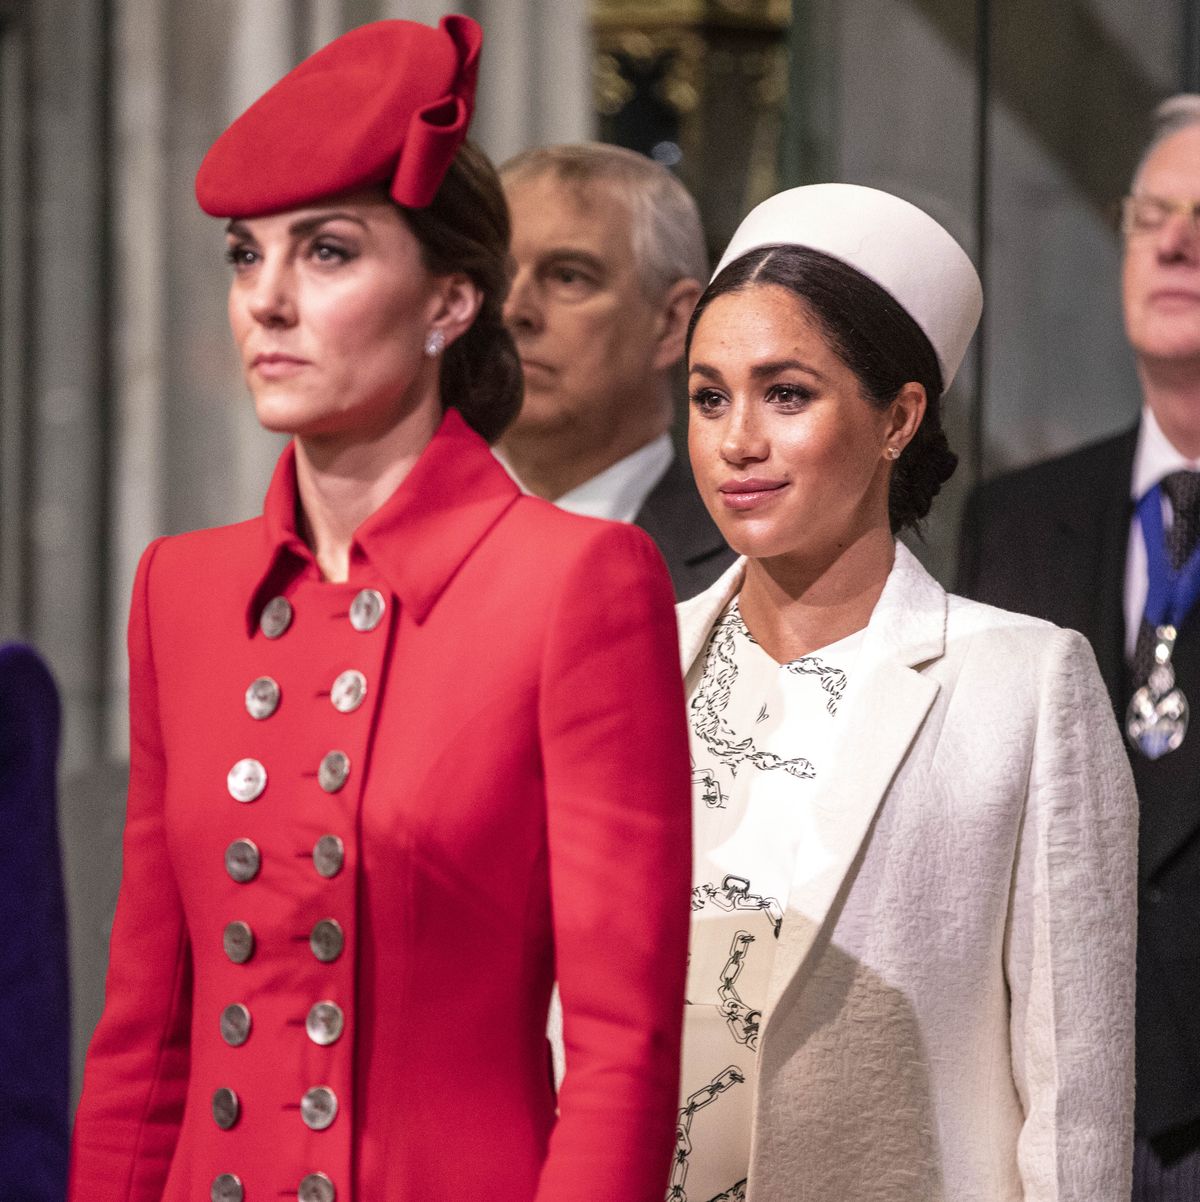 london, england march 11 catherine, the duchess of cambridge stands with meghan, duchess of sussex at westminster abbey for a commonwealth day service on march 11, 2019 in london, england commonwealth day has a special significance this year, as 2019 marks the 70th anniversary of the modern commonwealth, with old ties and new links enabling cooperation towards social, political and economic development which is both inclusive and sustainable the commonwealth represents a global network of 53 countries and almost 24 billion people, a third of the worlds population, of whom 60 percent are under 30 years old each year the commonwealth adopts a theme upon which the service is based this years theme a connected commonwealth speaks of the practical value and global engagement made possible as a result of cooperation between the culturally diverse and widely dispersed family of nations, who work together in friendship and goodwill the commonwealths governments, institutions and people connect at many levels, including through parliaments and universities they work together to protect the natural environment and the ocean which connects many commonwealth nations, shore to shore cooperation on trade encourages inclusive economic empowerment for all people particularly women, youth and marginalised communities the commonwealths friendly sporting rivalry encourages people to participate in sport for development and peace photo by richard pohle wpa poolgetty images